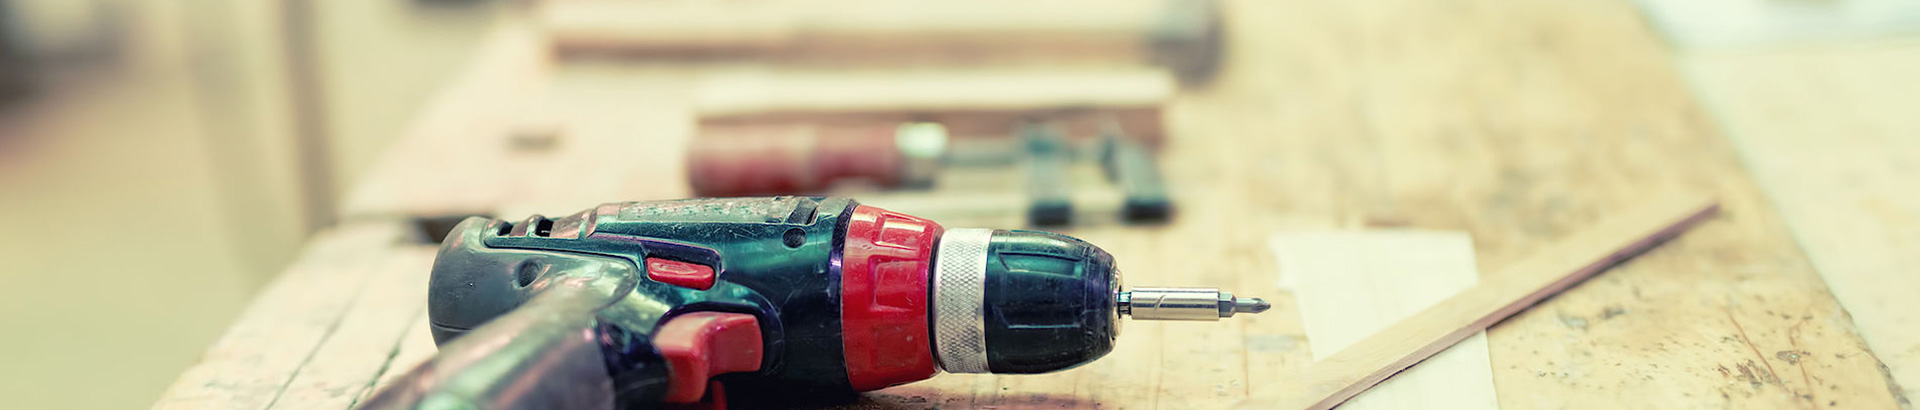 What are the components and advantages and disadvantages of pneumatic tools?